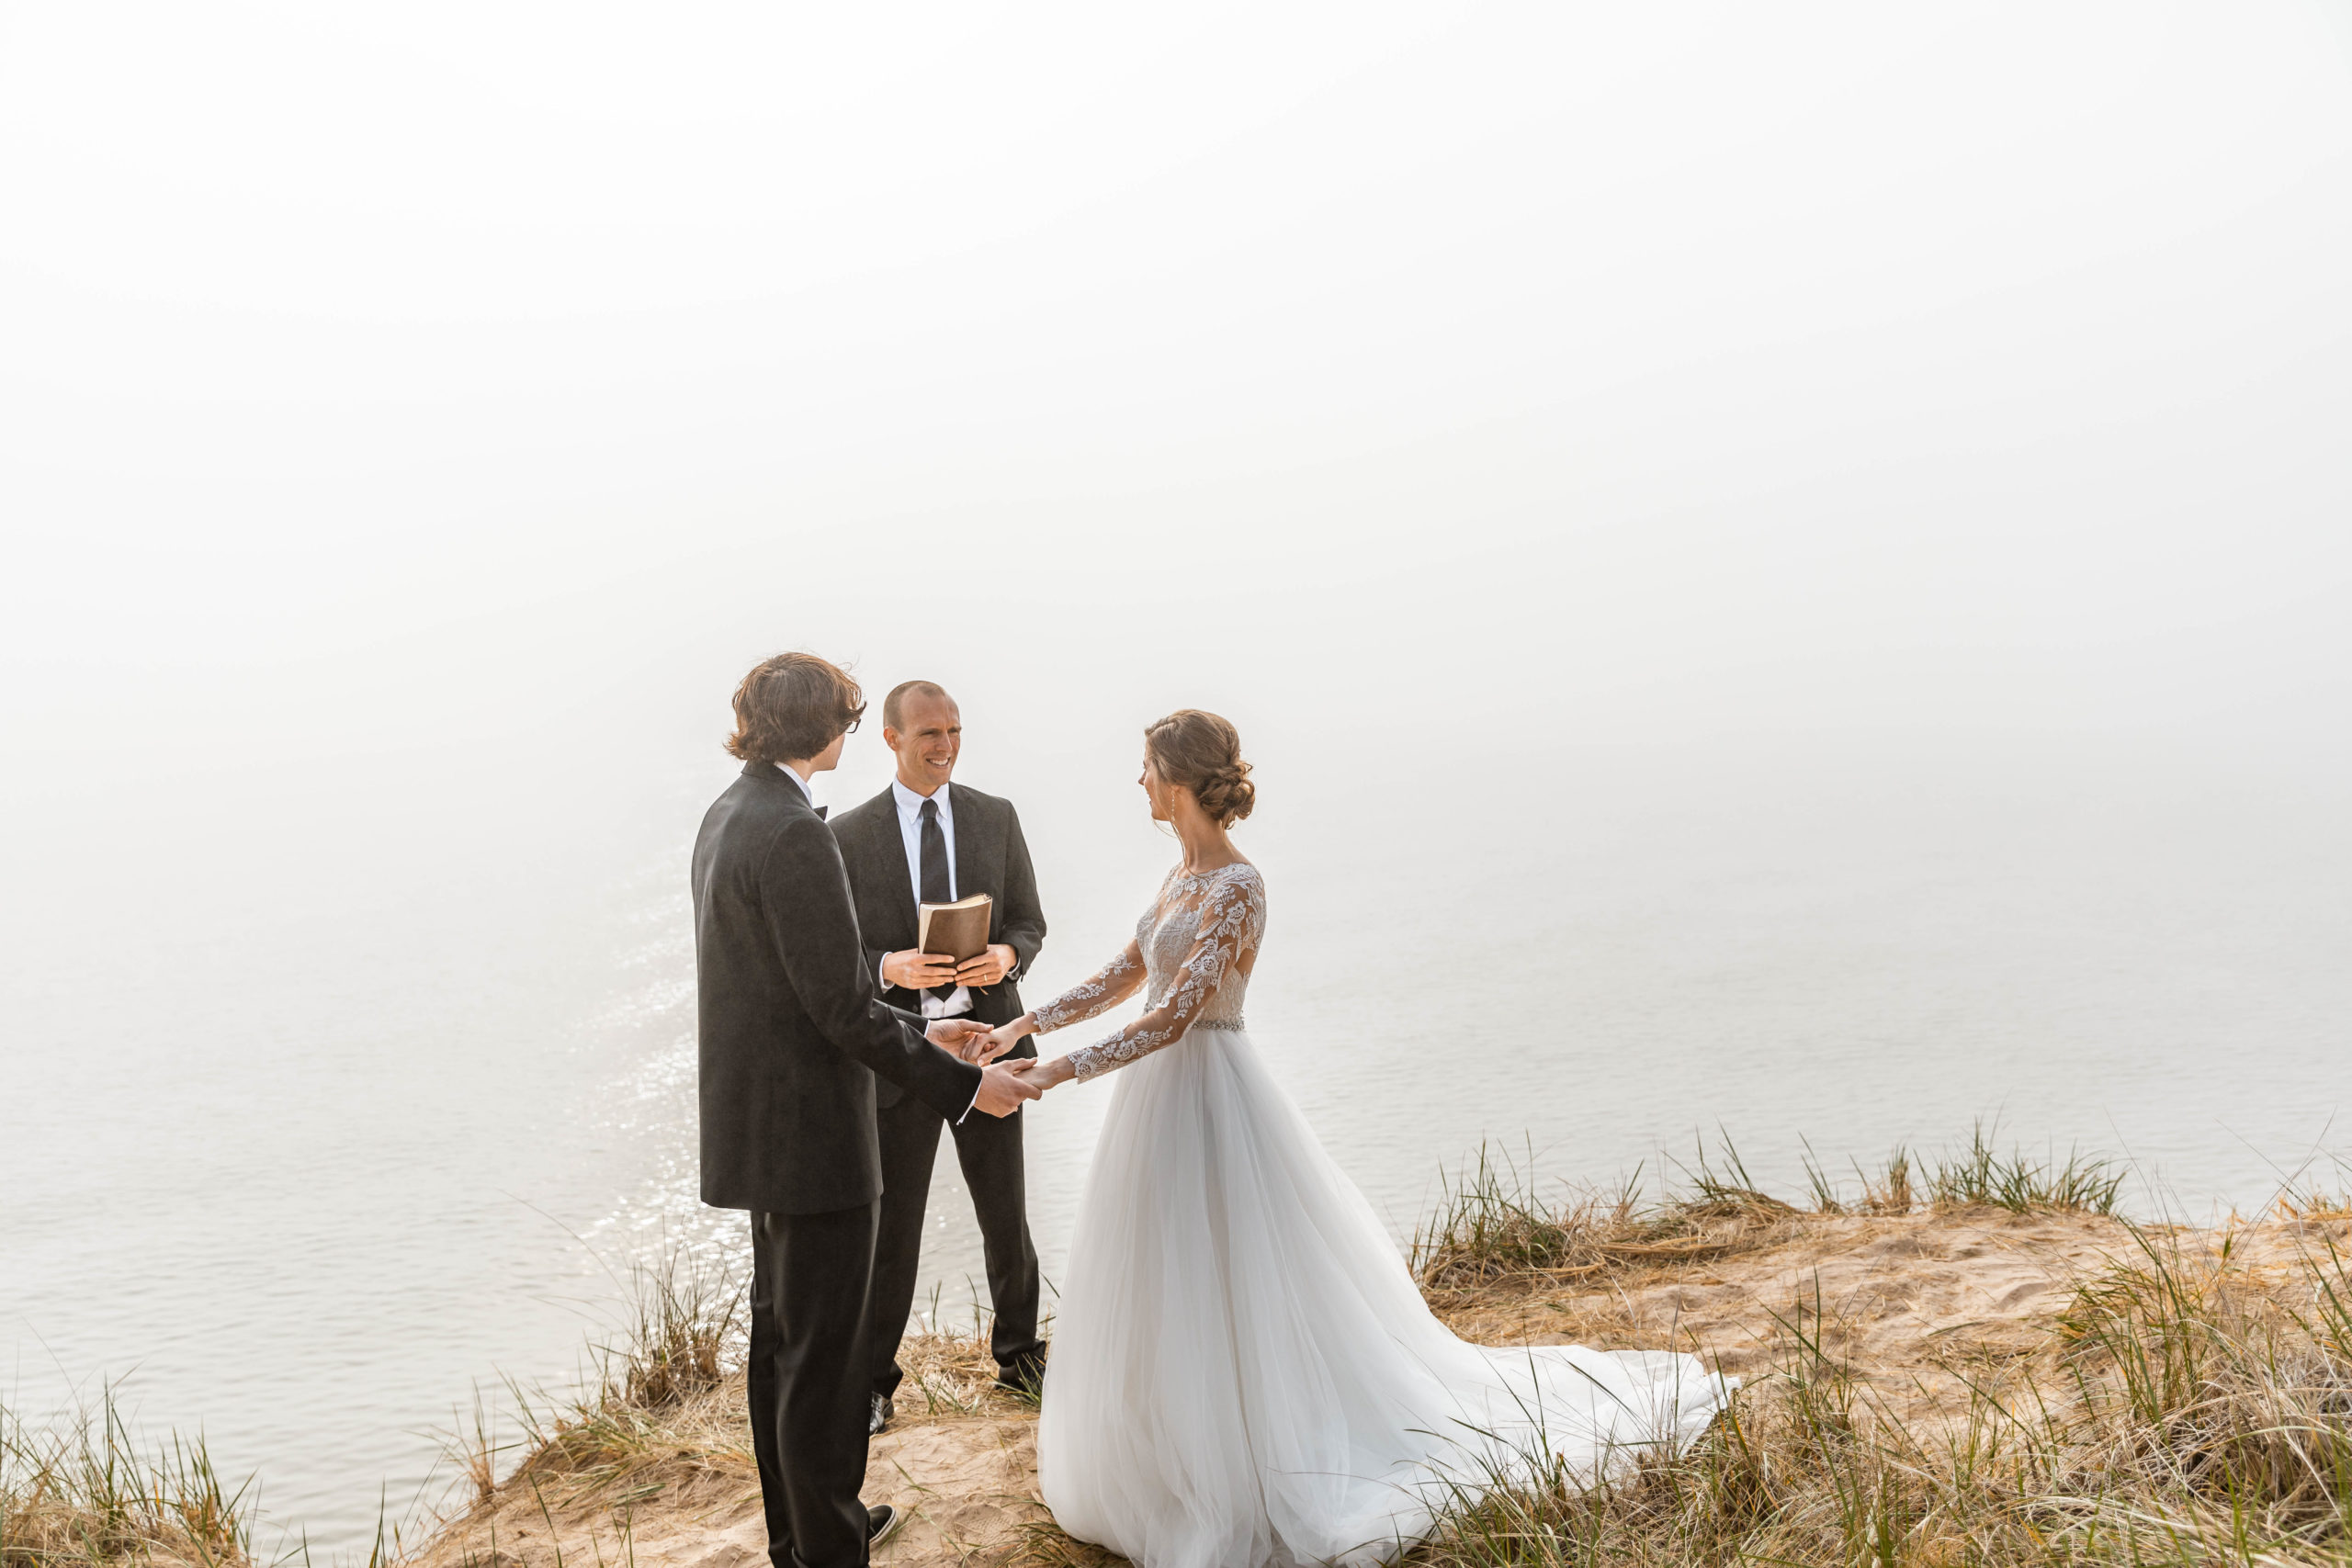 Bride and groom holding hands in front of officiant on dunes overlooking lake